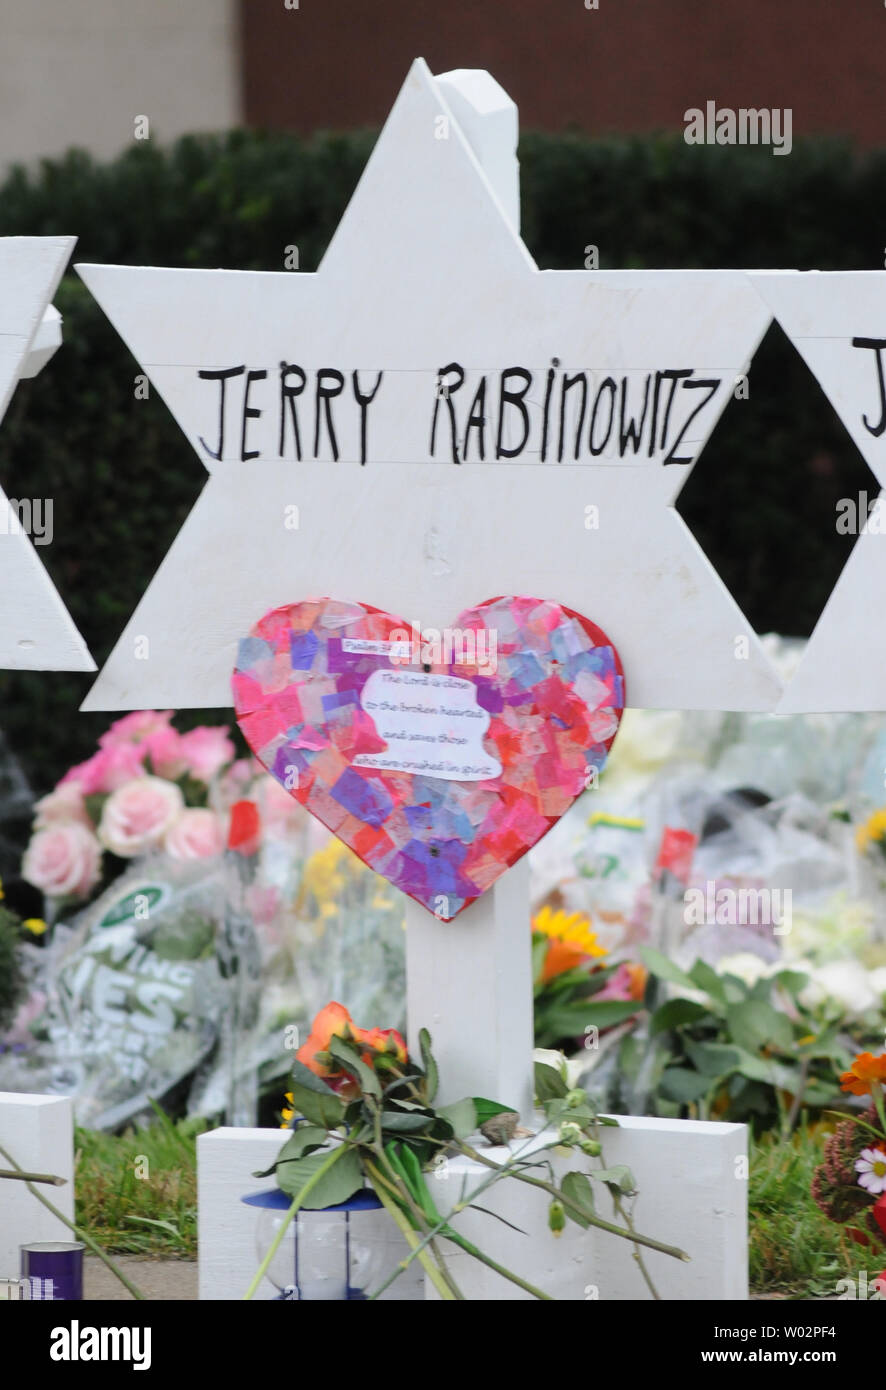 Jerry Rabinowitz, one of the 11 victims of the shooting on Saturday morning name is written on a Star of David sign at the temporary memorial outside the Tree of Life Synagogue in the Squirrel Hill neighborhood of Pittsburgh on October 29, 2018.  Photo by Archie Carpenter/UPI Stock Photo